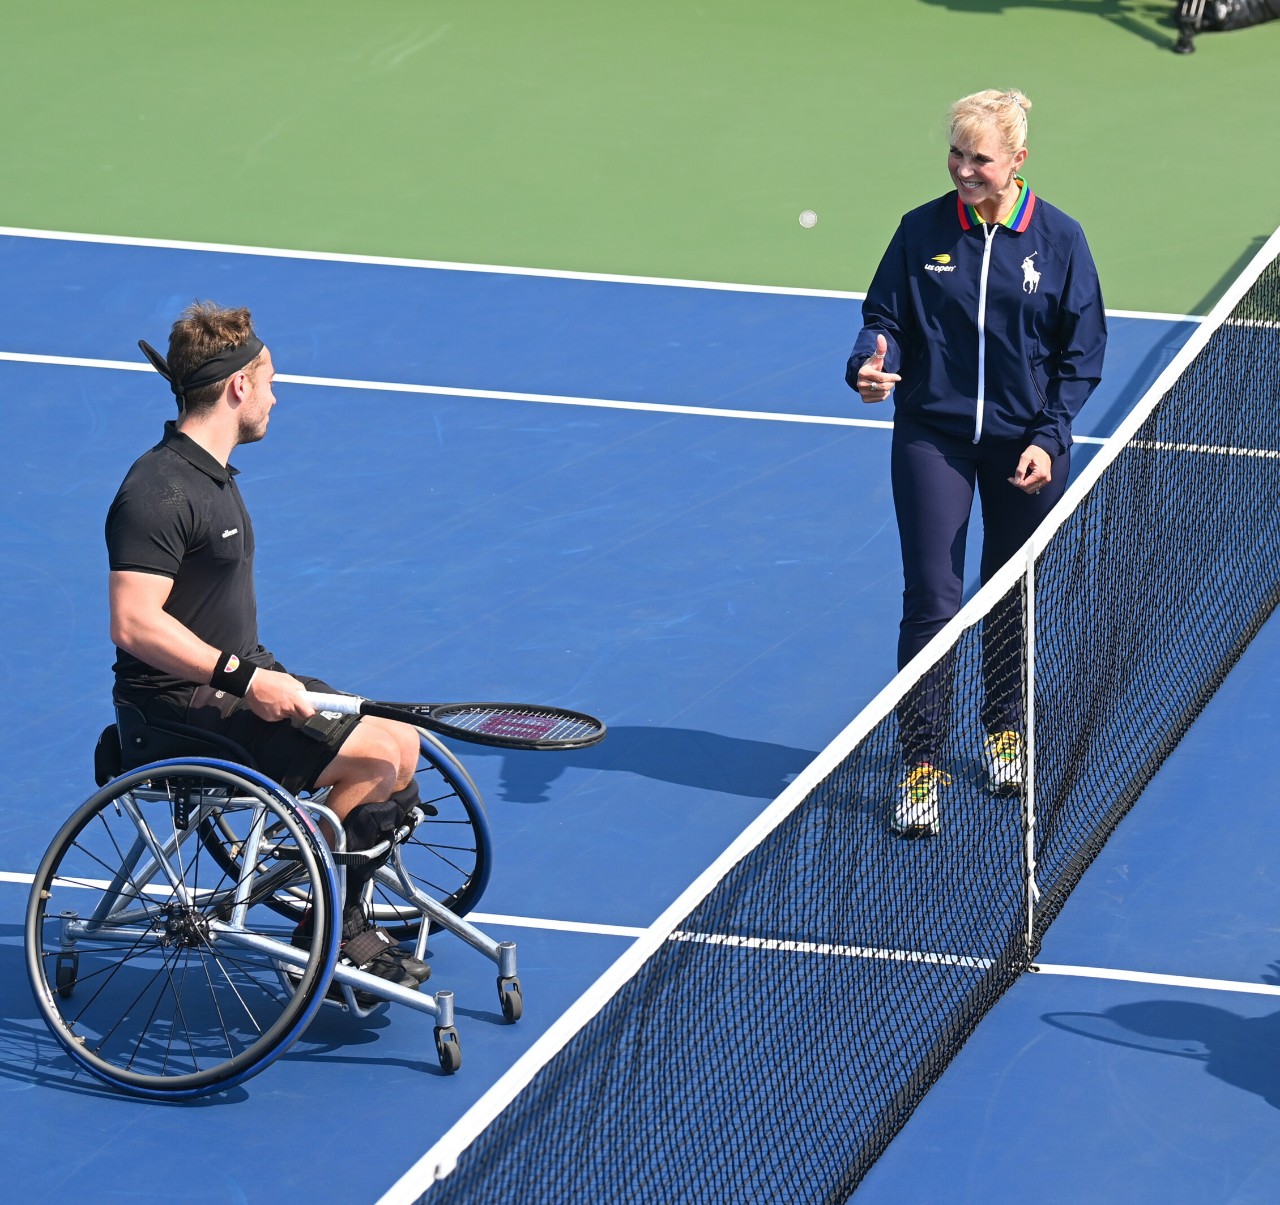 Alfie Hewett and Shingo Kunieda participate in a pre-match coin toss prior to a Wheelchair Men's Singles championship match at the 2021 US Open, Sunday, Sep. 12, 2021 in Flushing, NY. (Andrew Ong/USTA)